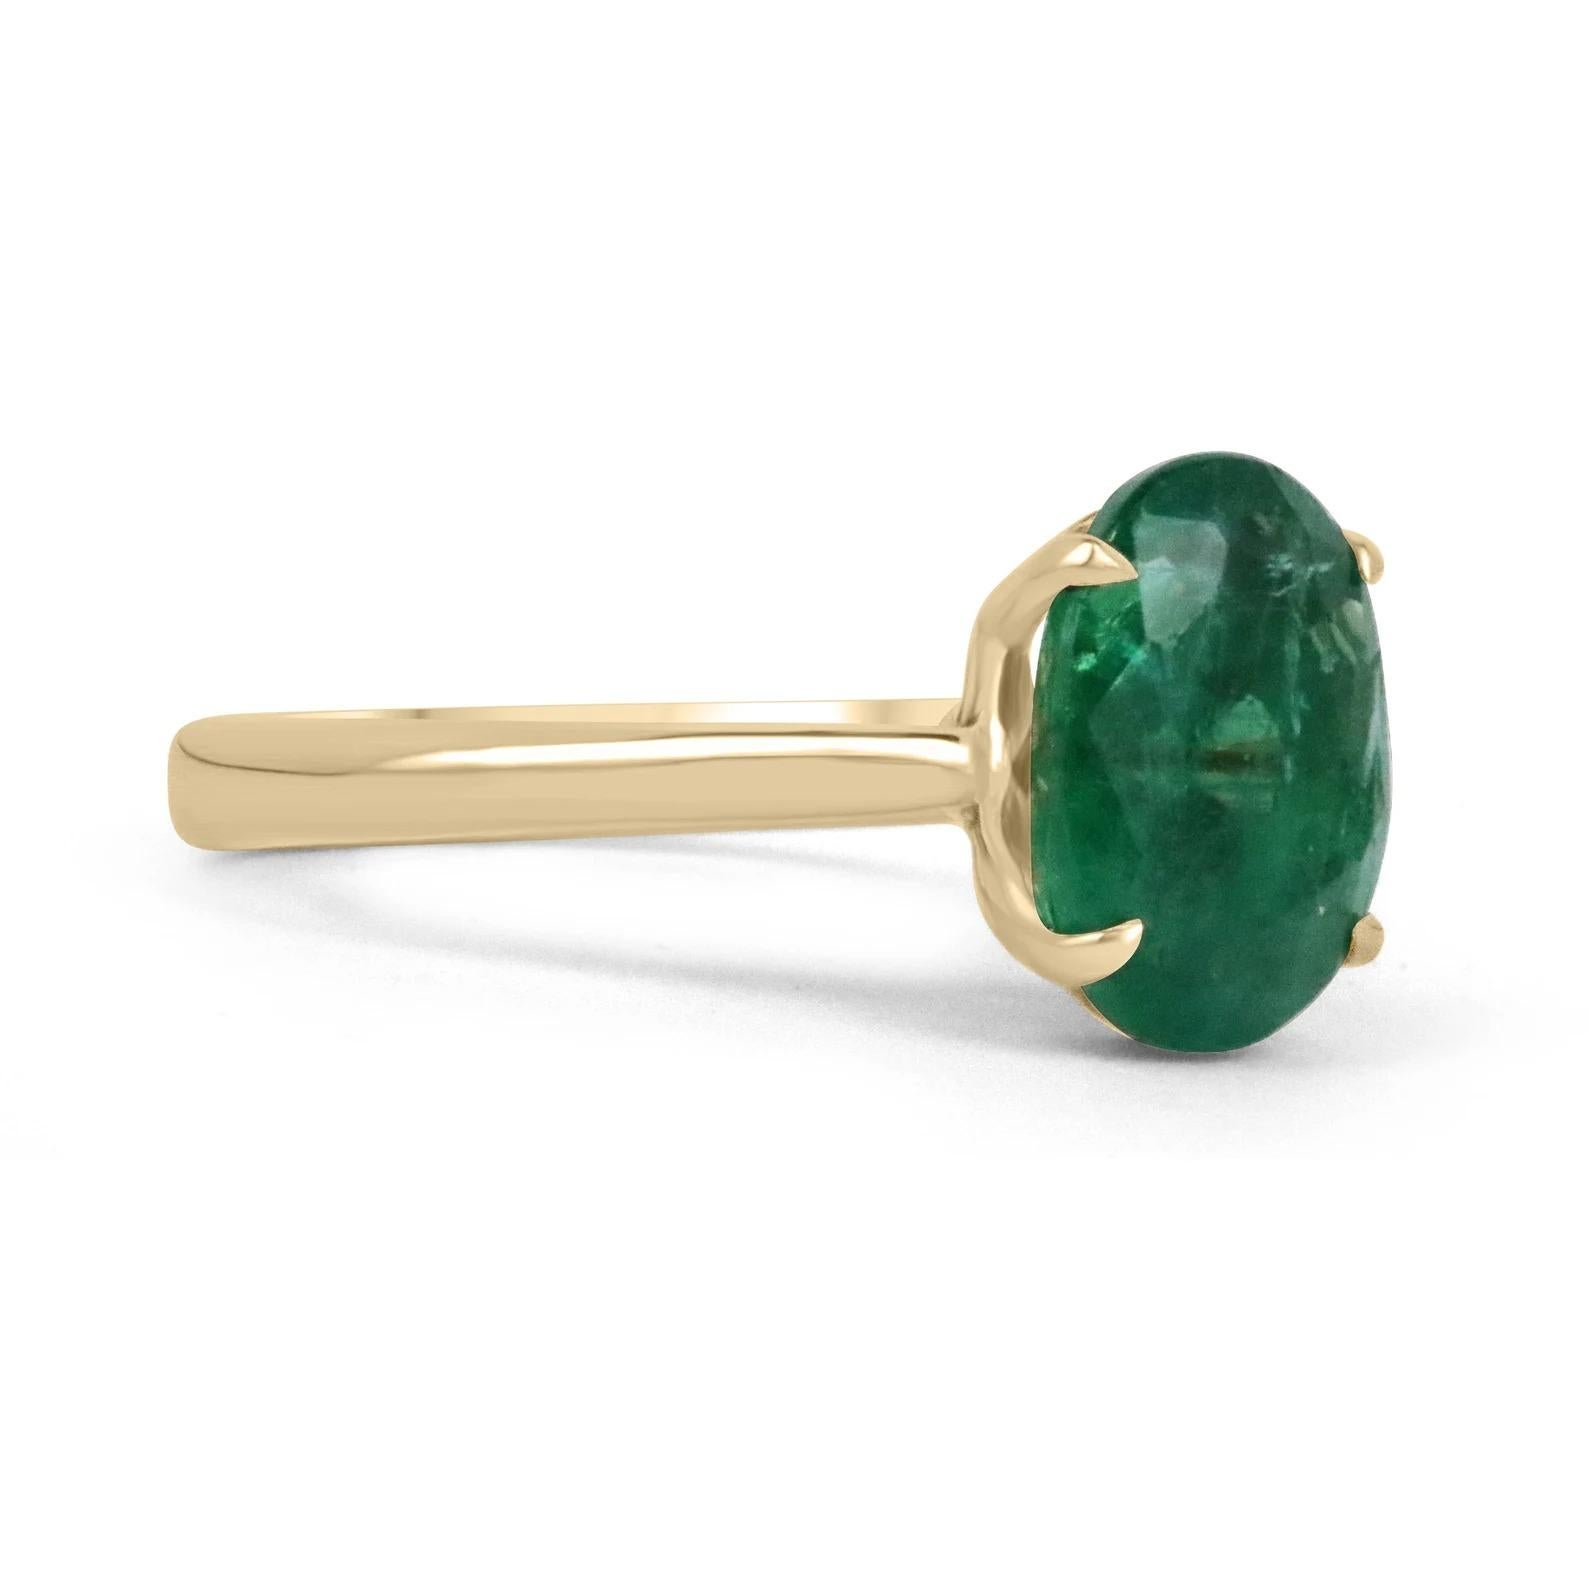 A stunning solitaire emerald ring. This gorgeous piece showcases a ravishing 3.78-carat, natural, fine-quality Zambian emerald. The gemstone displays an enthralling deep, lustrous, emerald green color with remarkable qualities. Securely claw prong